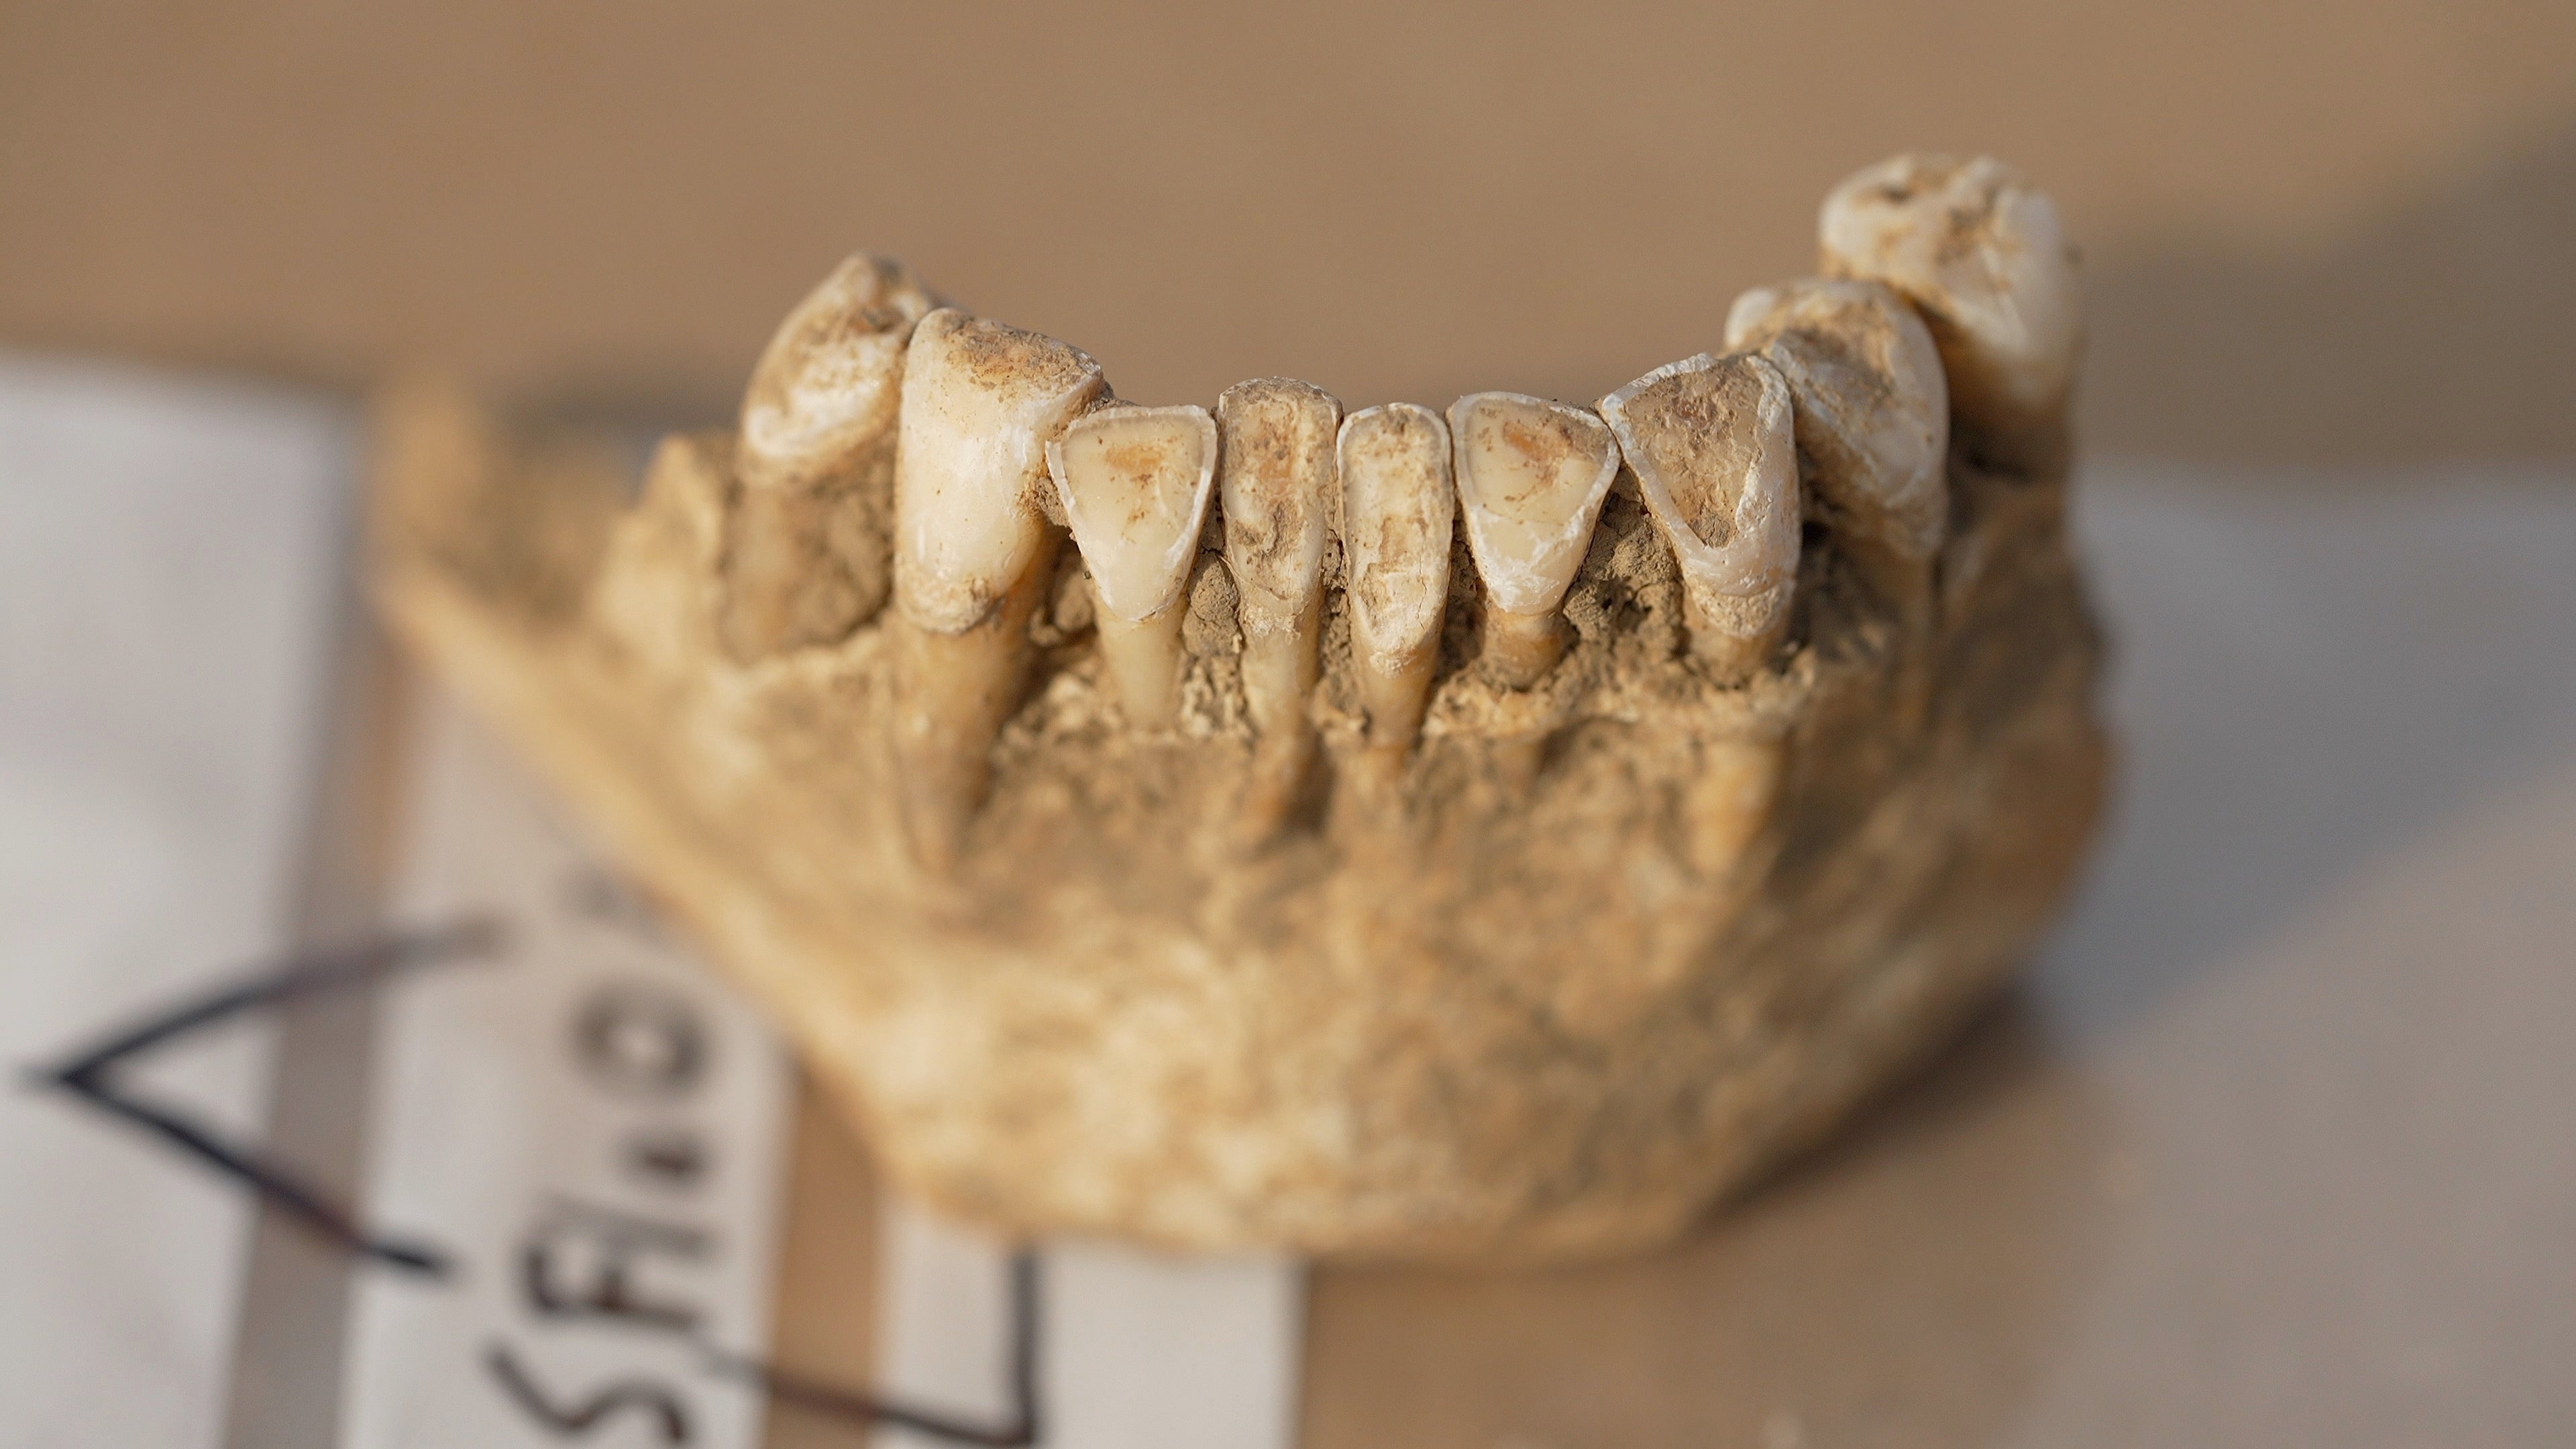 The front teeth from one of the skeletons are very worn